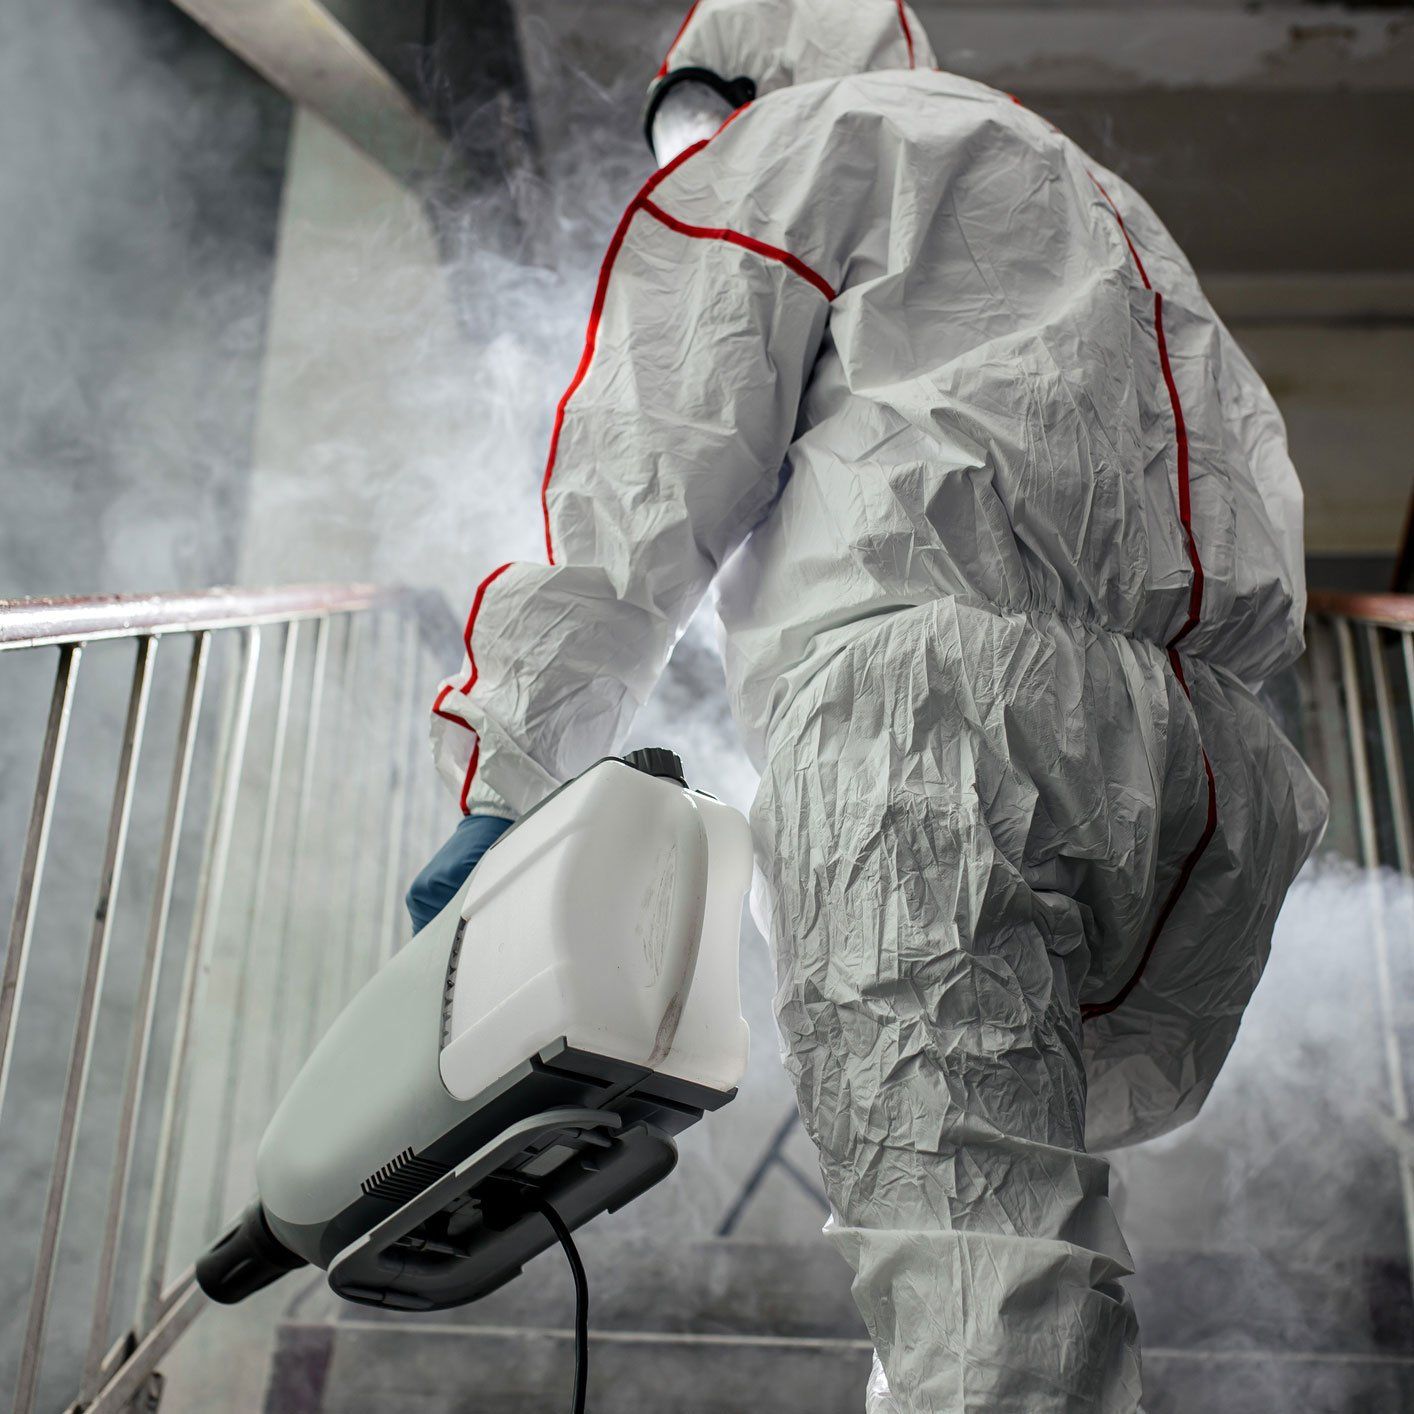 Mold Removal in West Palm Beach, FL